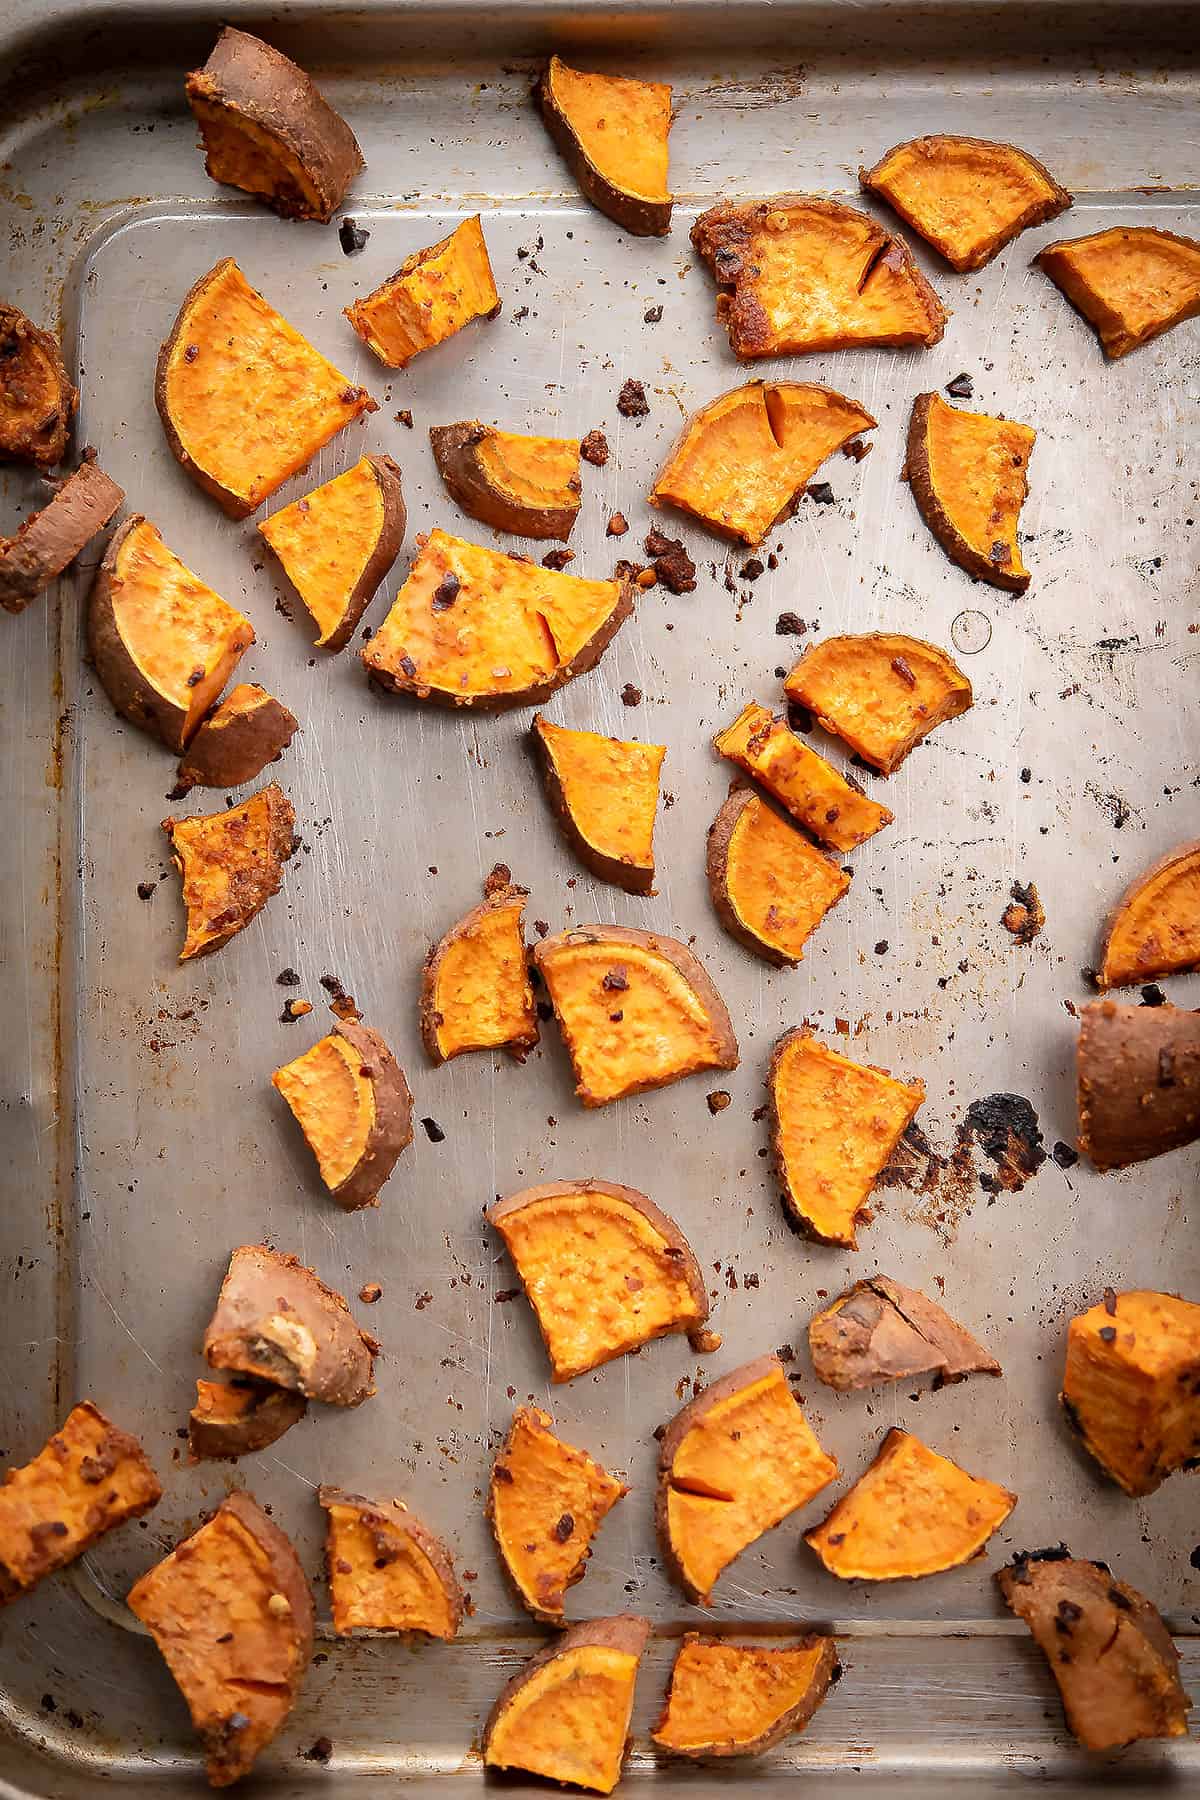 spice coated sweet potatoes are ready for snacking!